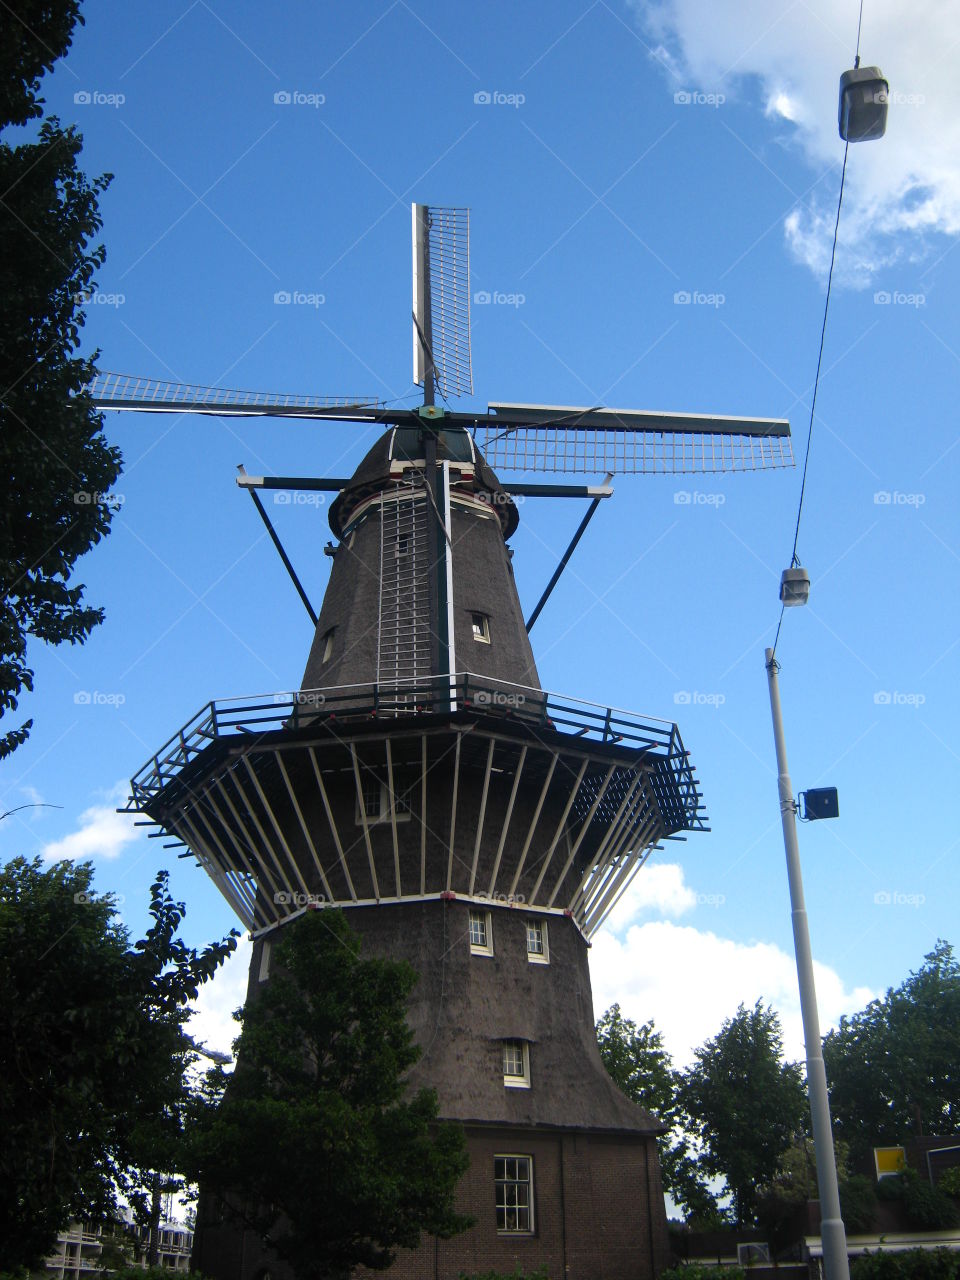 One of the few windmills in Amsterdam